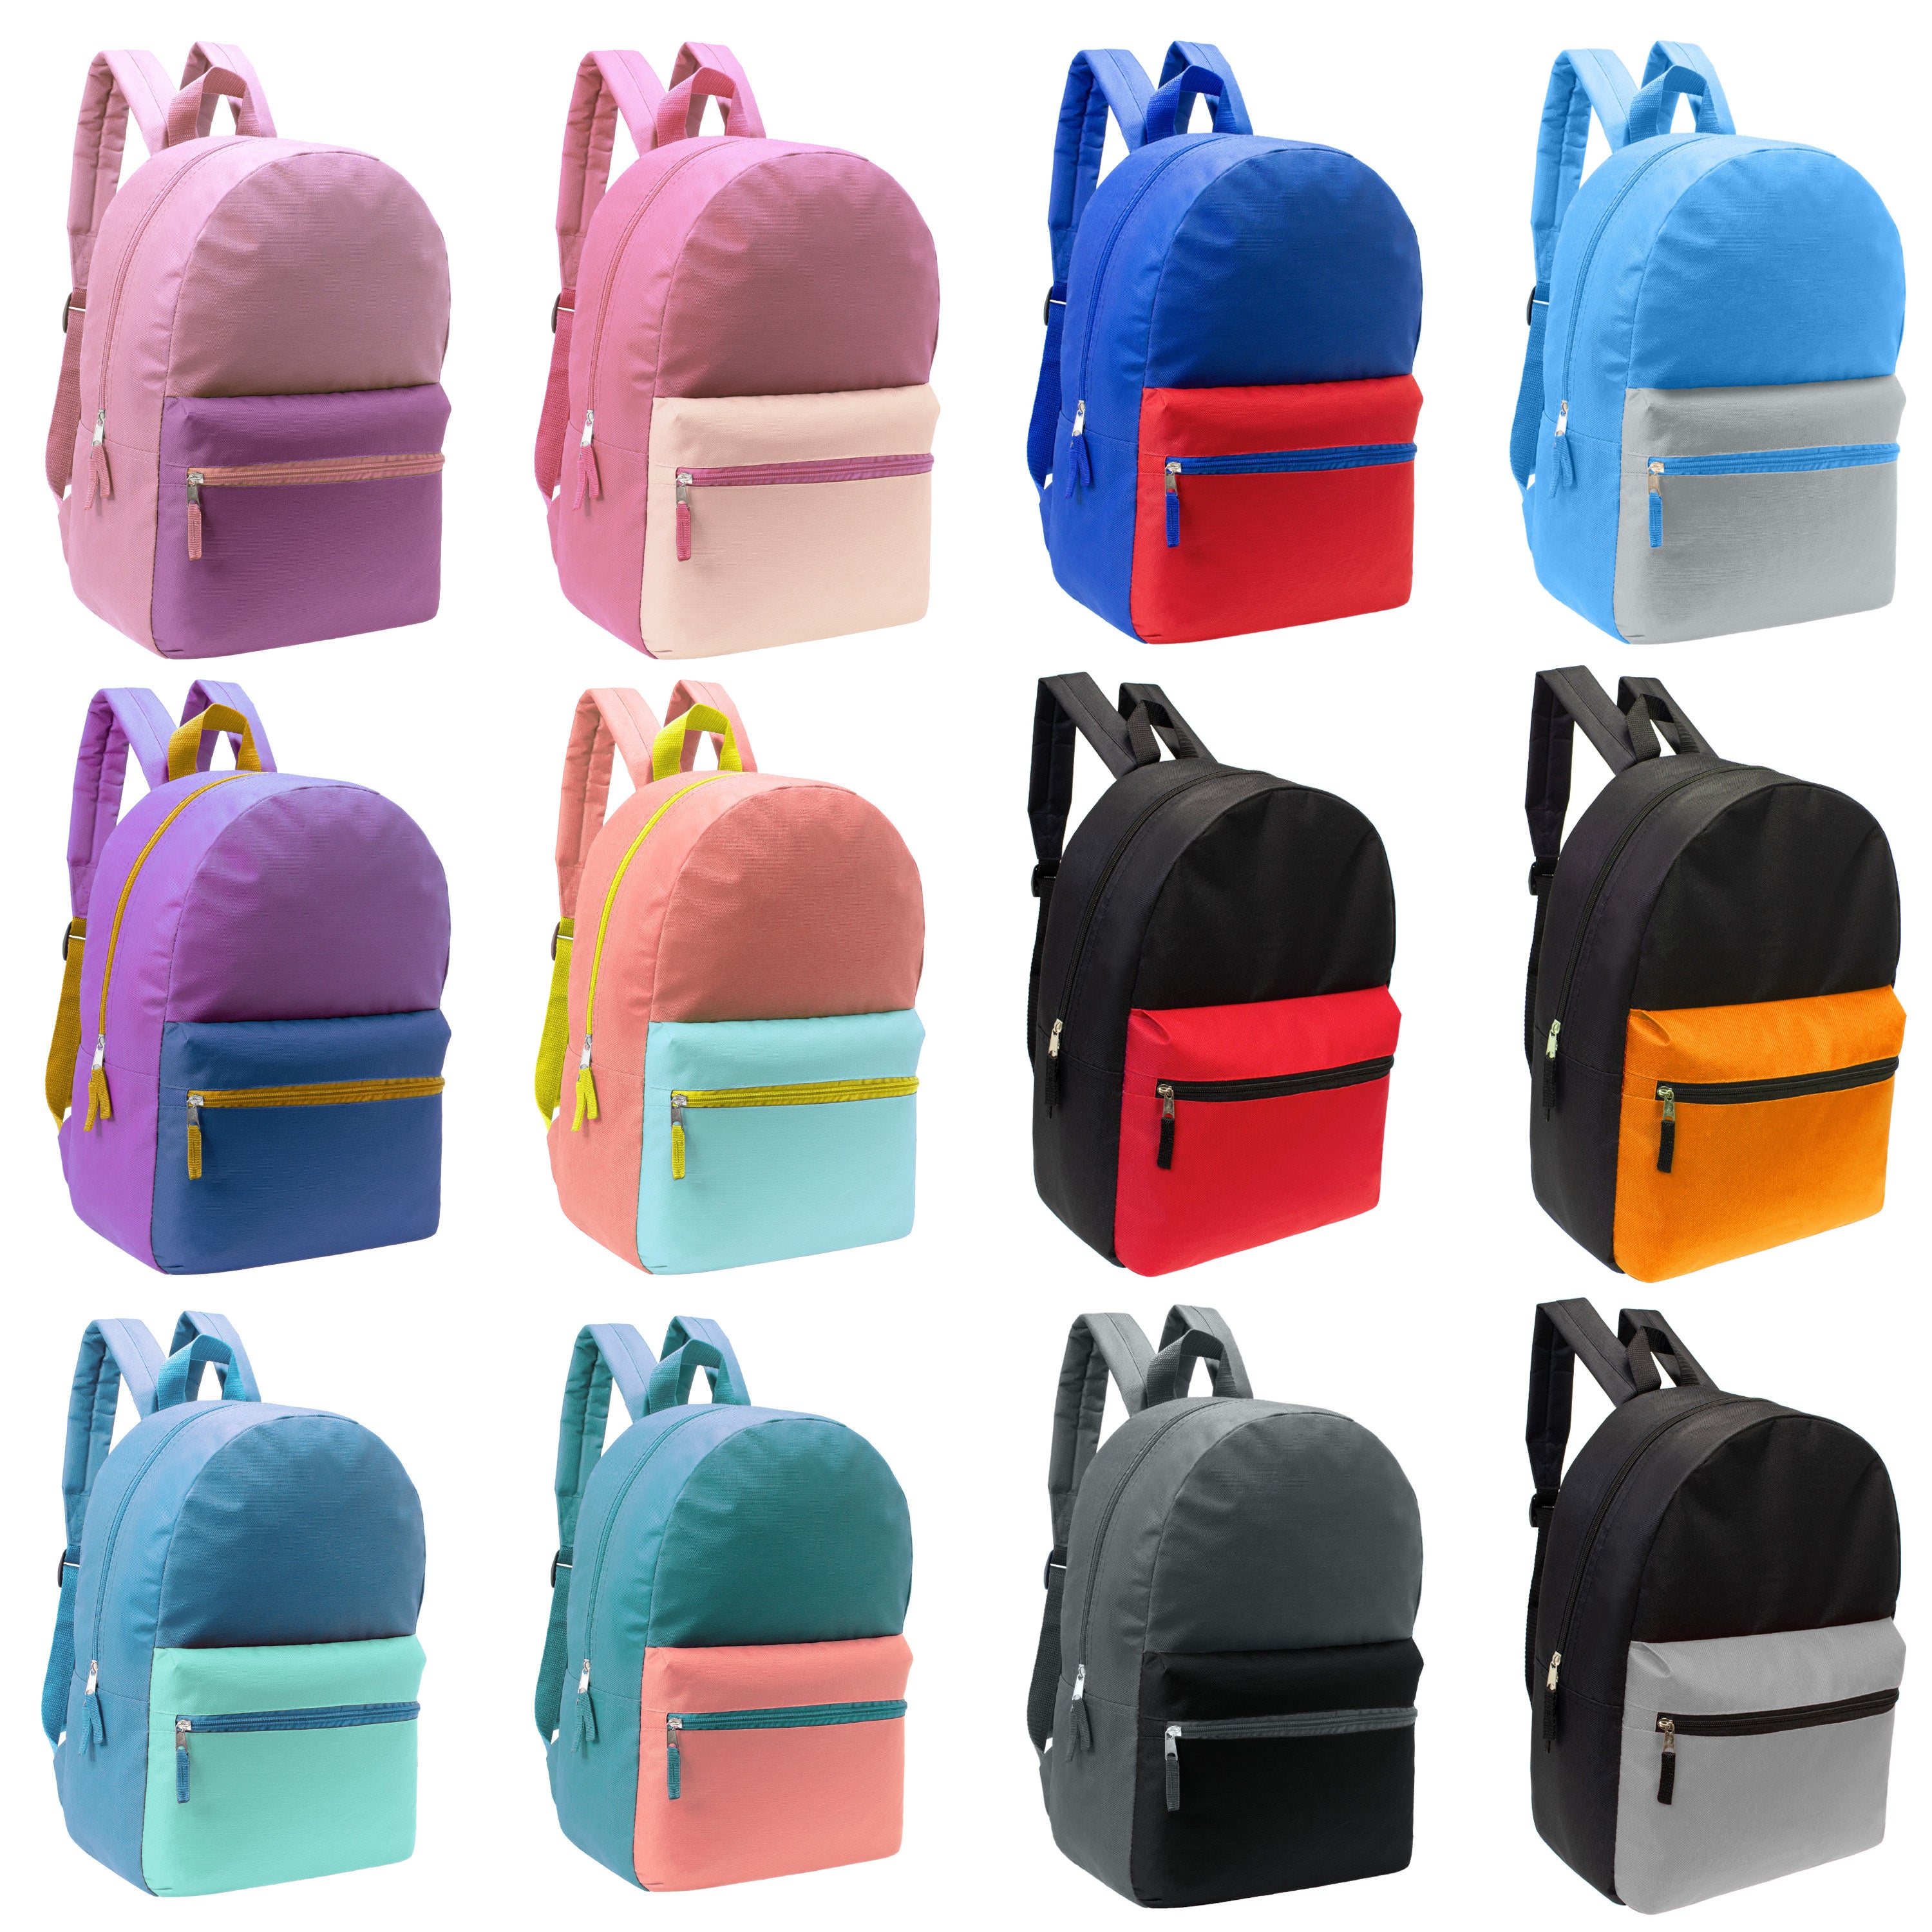 12 Wholesale 17" Two Tone Backpacks in 12 Assorted Colors & 12 Bulk School Supply Kits of Your Choice